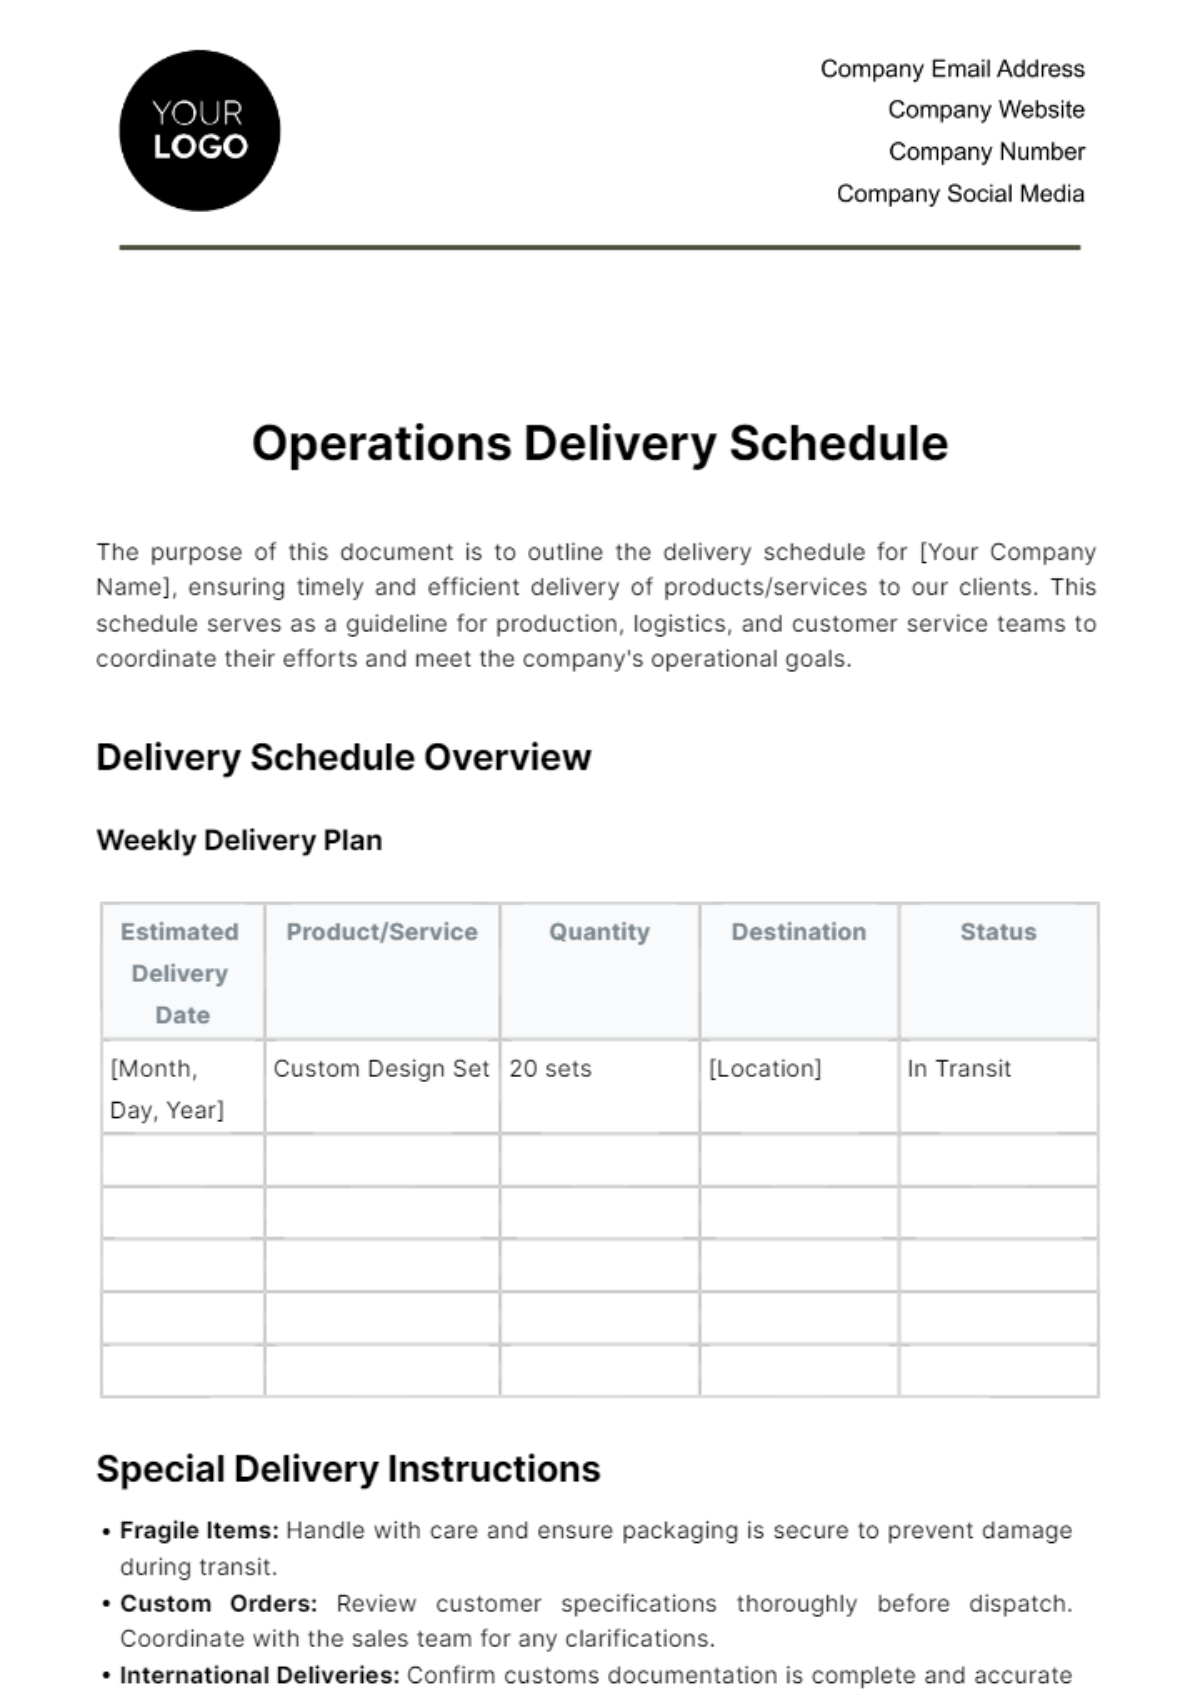 Operations Delivery Schedule Template